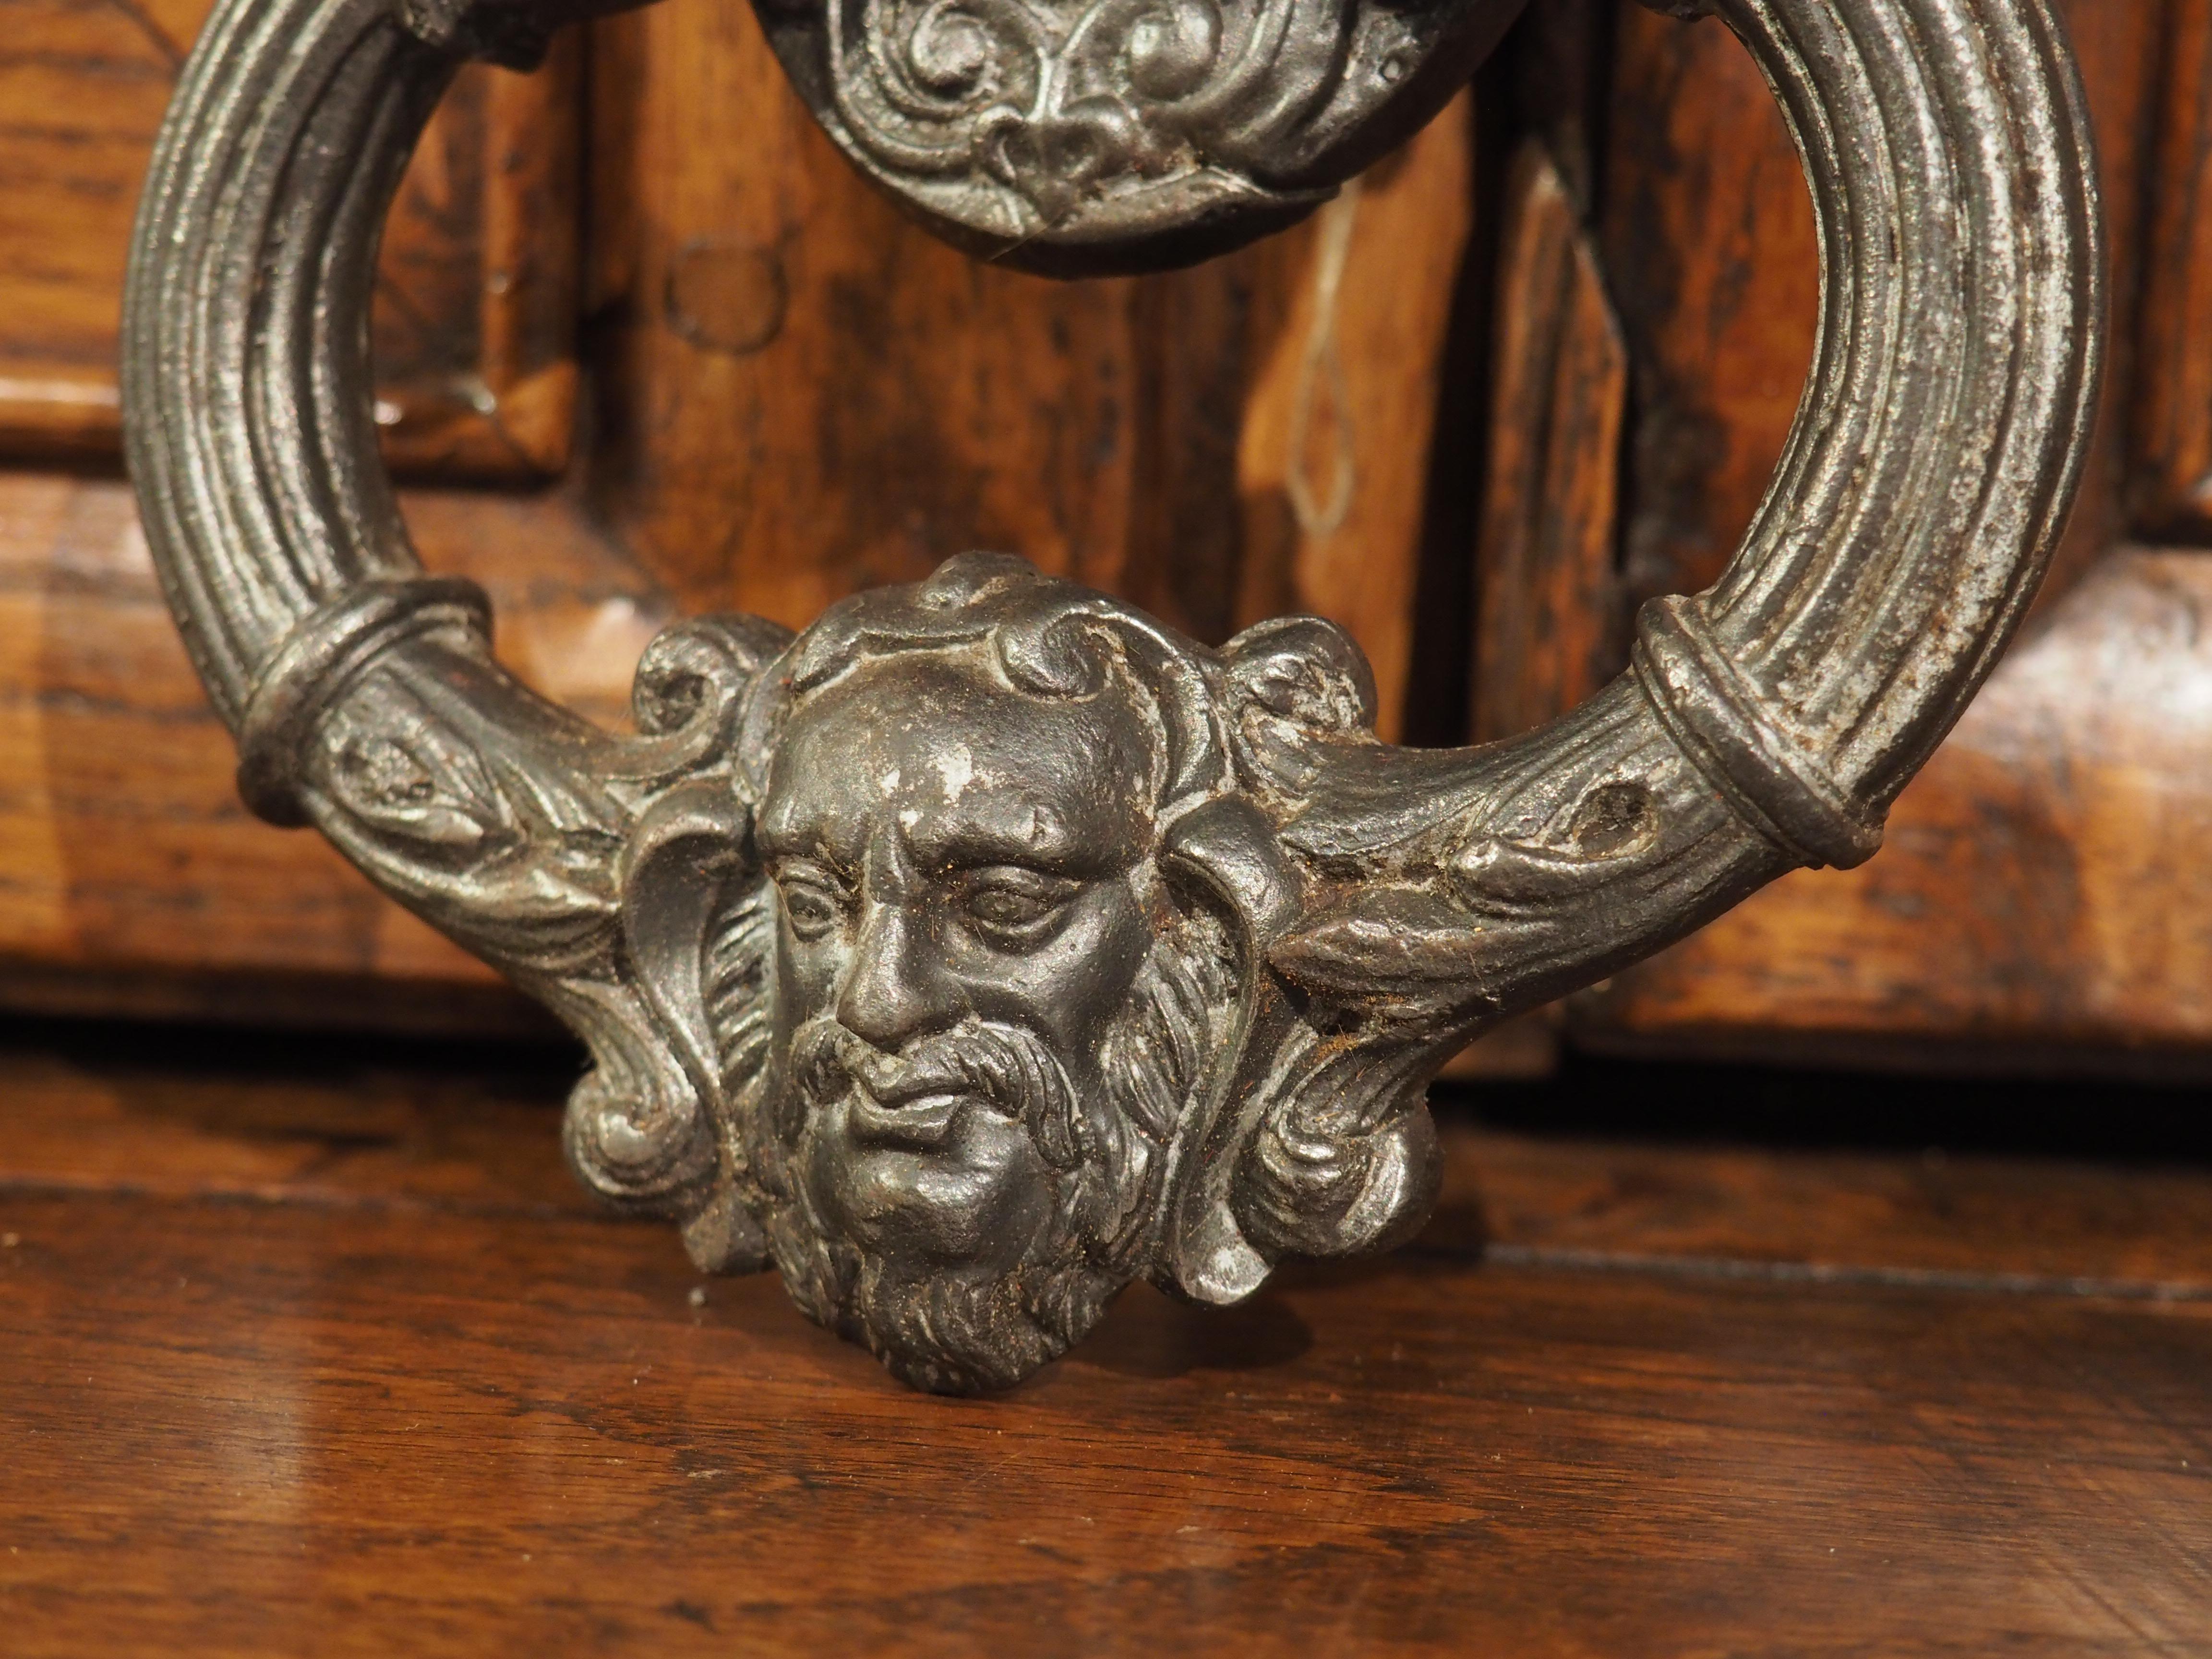 Cast in iron during the 1900s, this mascaron knocker will instantly enhance any front door. Its oval backplate is exquisitely adorned with intricate scrolls, delicate foliage, and a central rosette. The knocker’s shapely drop handle, enriched with